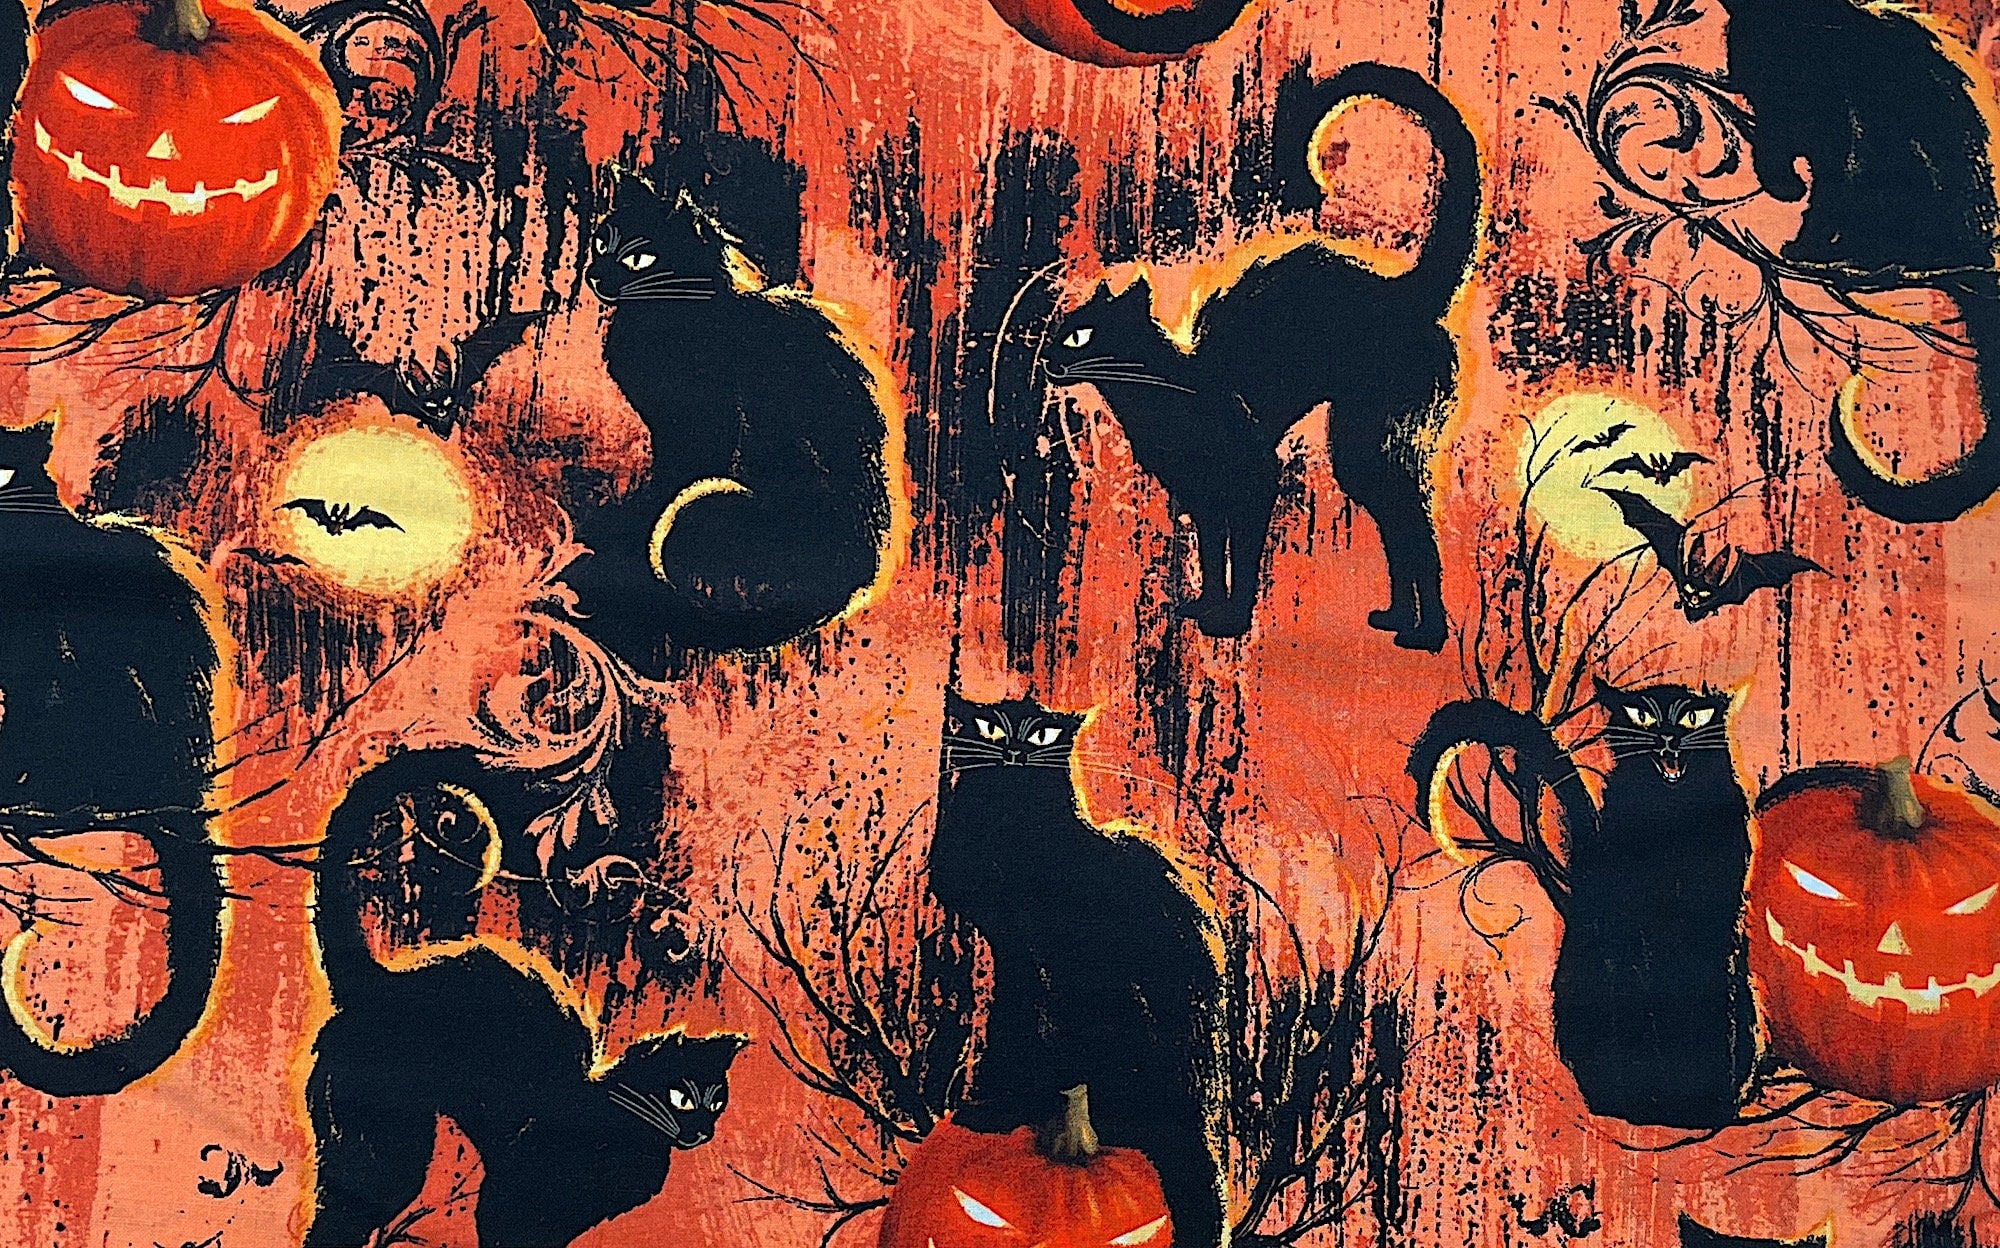 This orange fabric is covered with black cats and pumpkins. The cats are sitting on the pumpkins or on branches. There are also full moons and bats throughout the fabric.